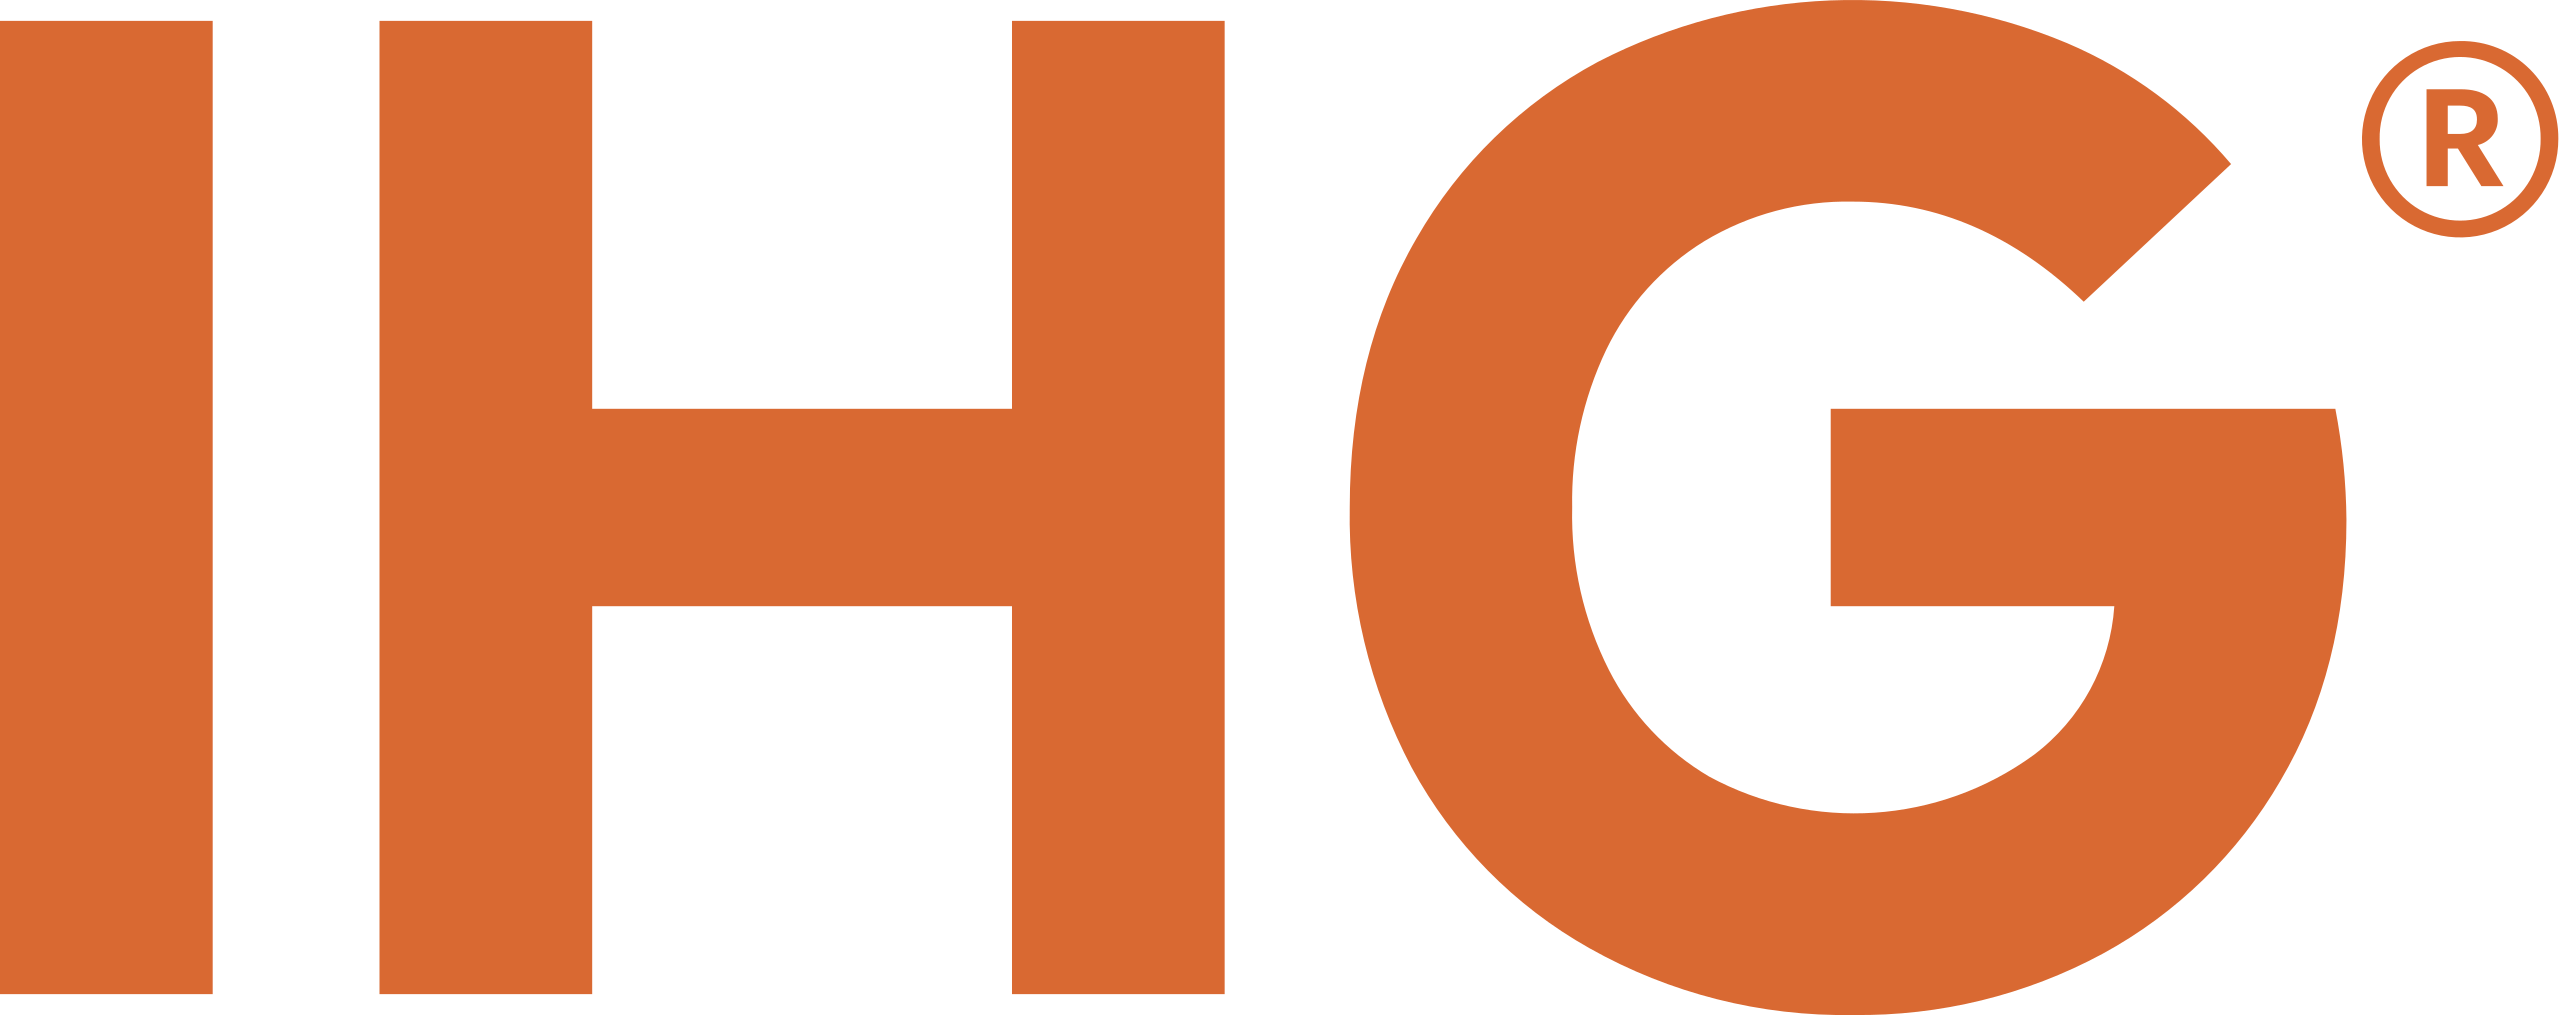 IHG leverages CMX1 for guest experience 